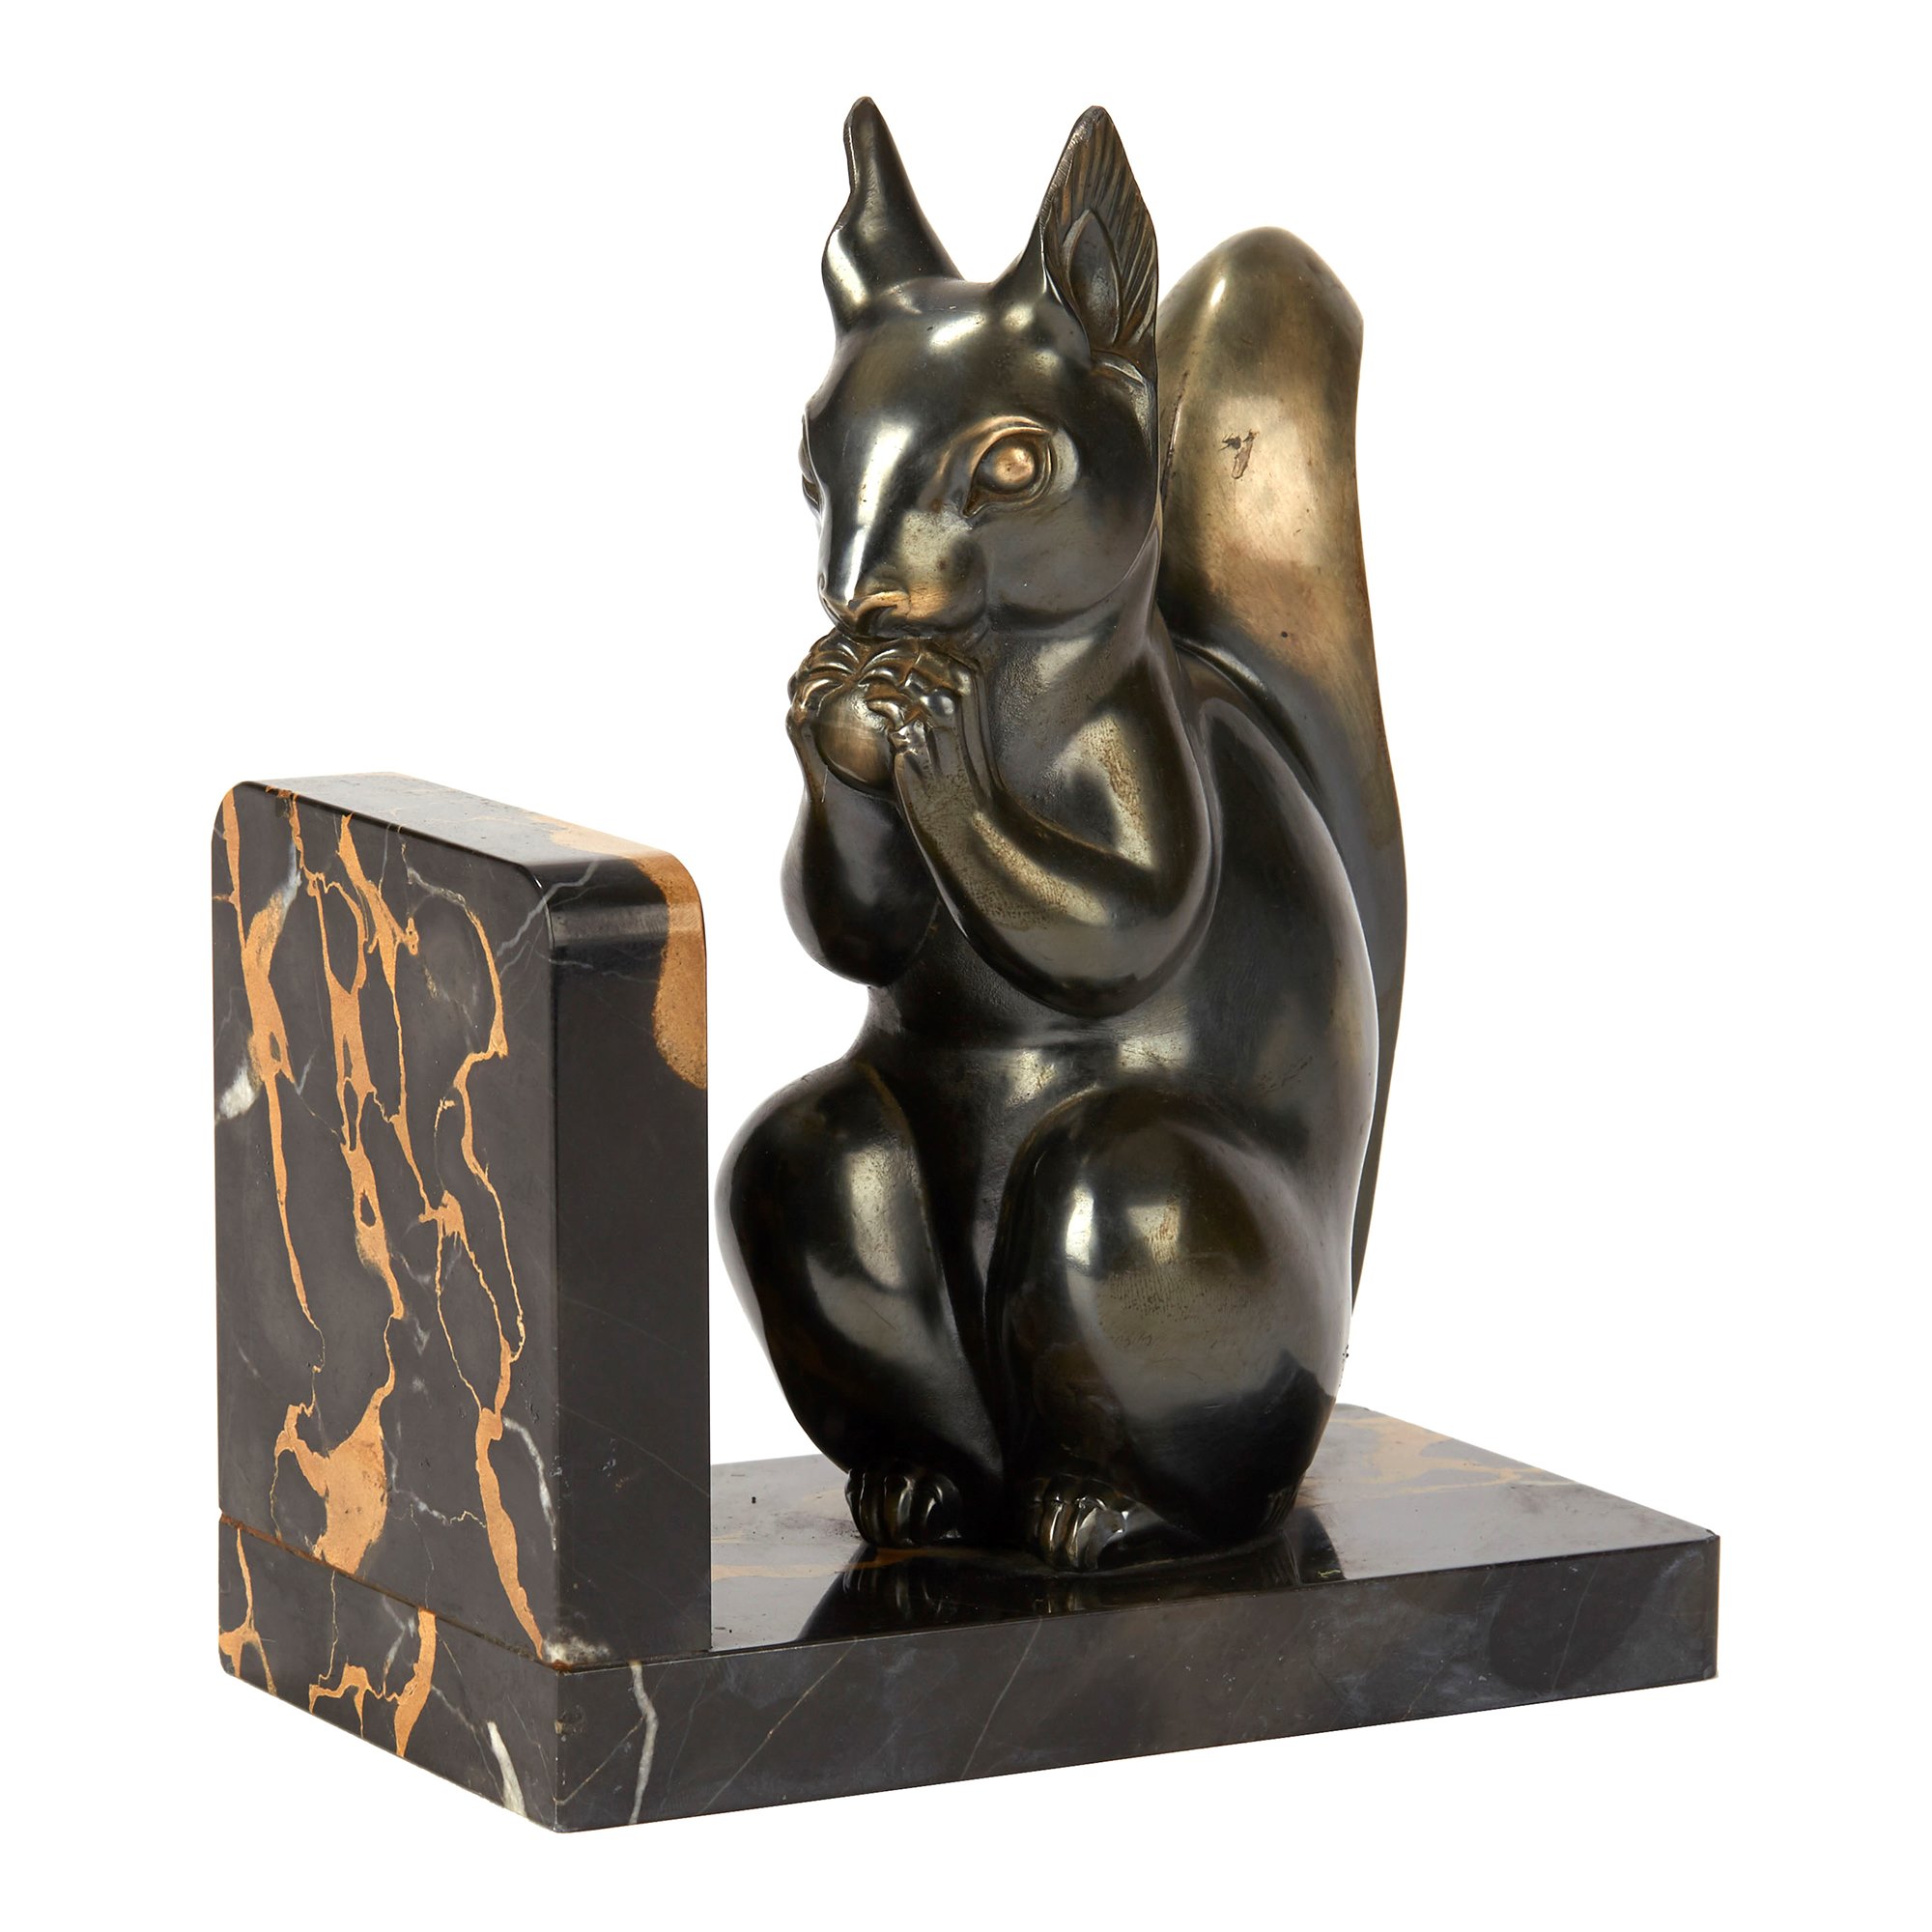 PAIR ART DECO SQUIRREL MOUNTED BOOKENDS BY MAURICE FONT Circa 1920-40